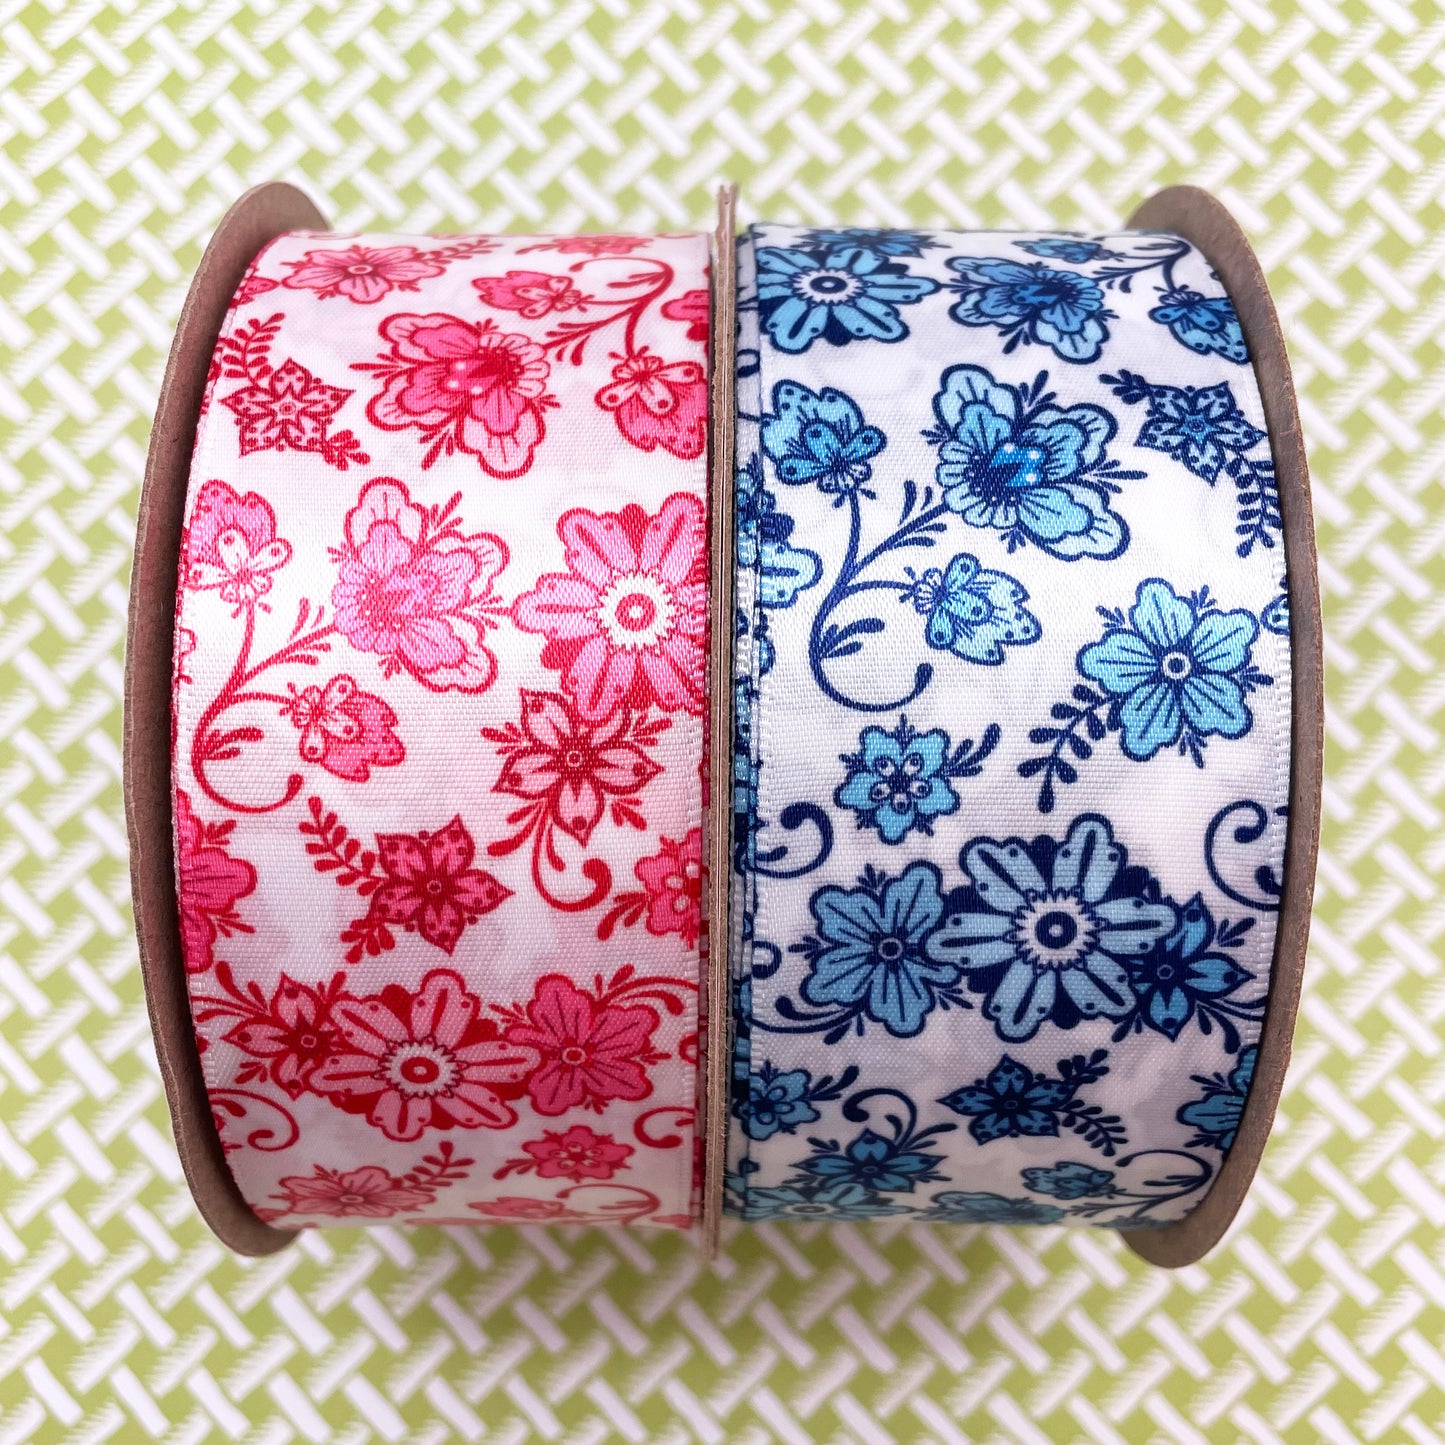 Chinoiserie Ginger jar floral design ribbon in blue and white printed on 1.5" white single face satin